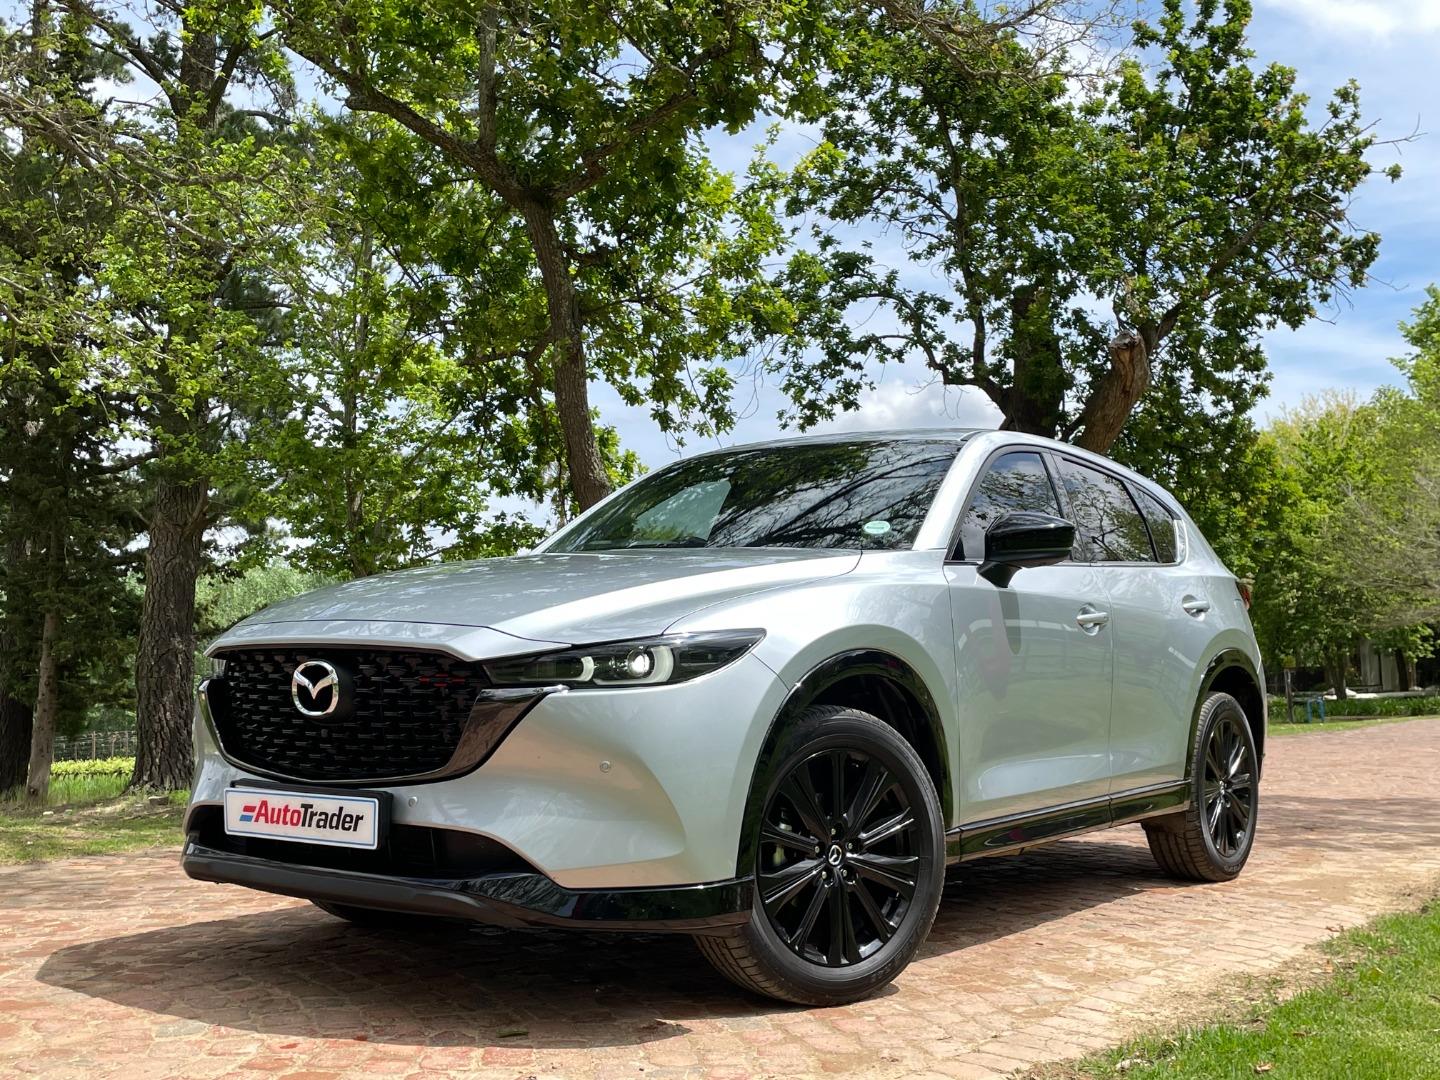 is the mazda cx-5 good for new drivers?